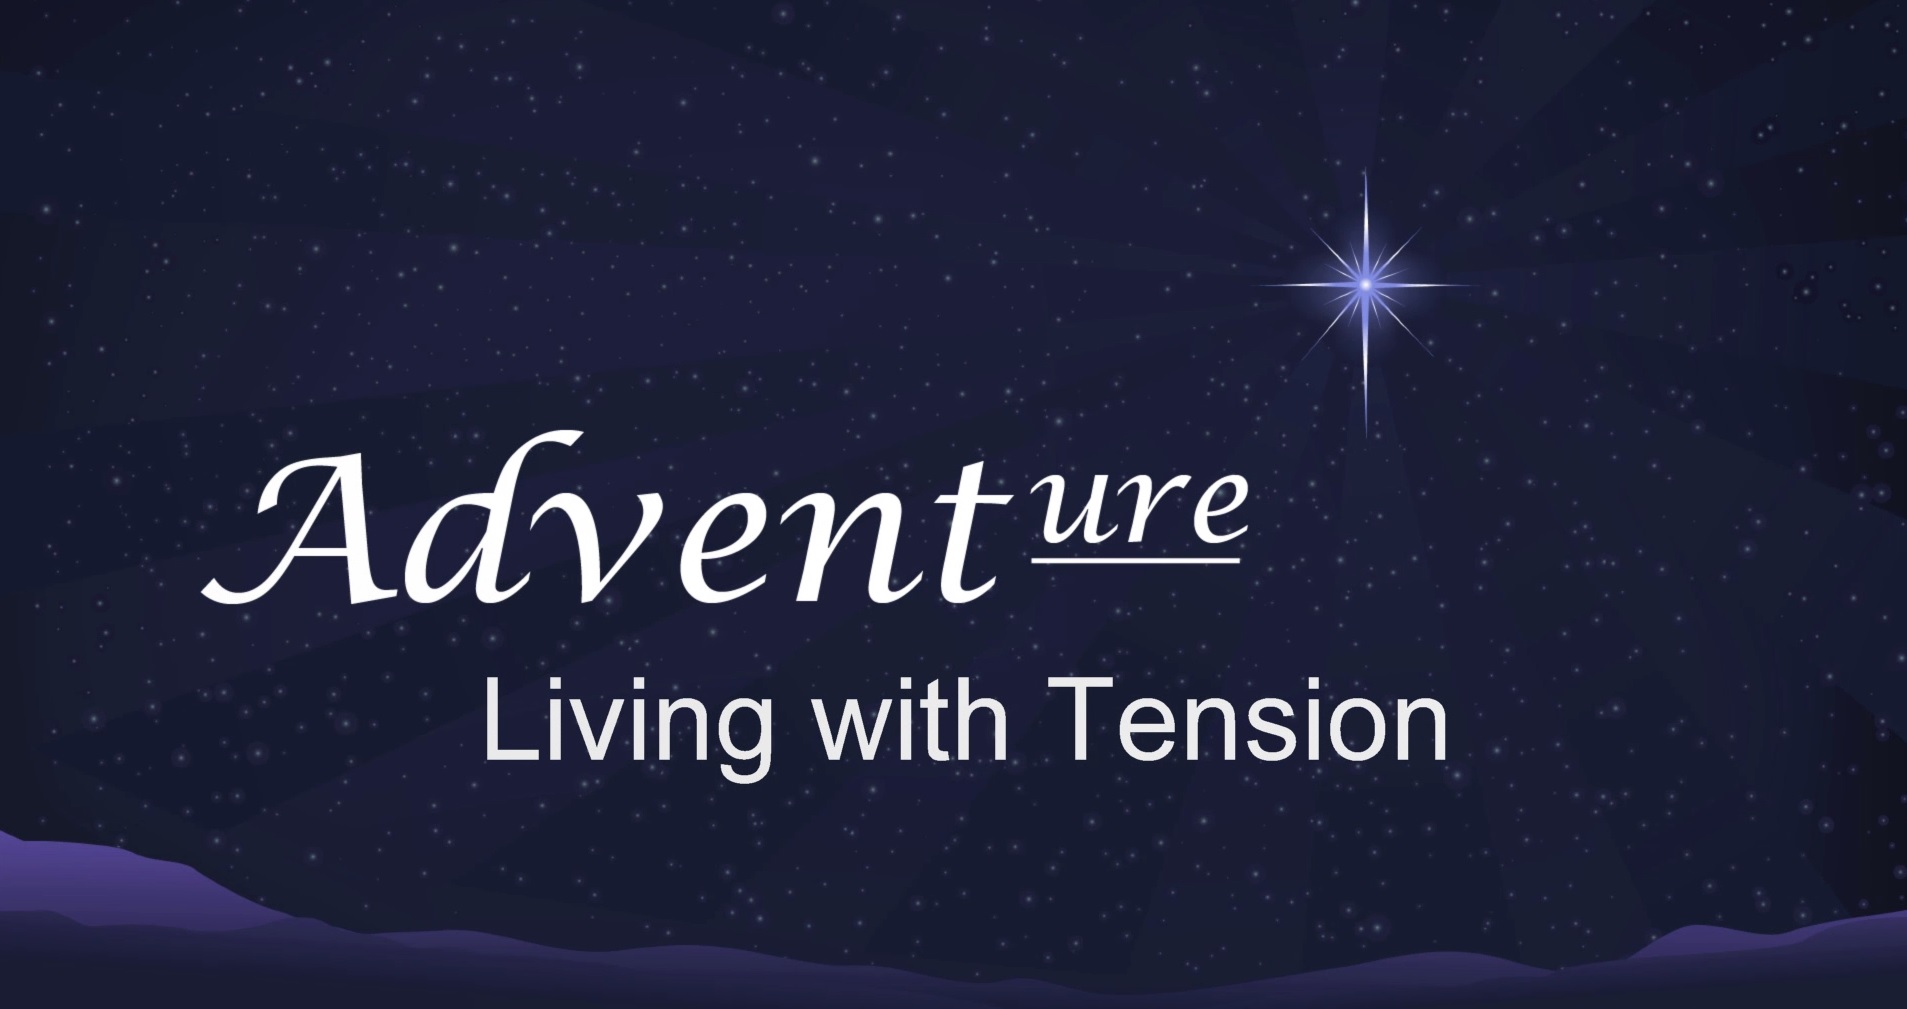 Advent: Living with Tension